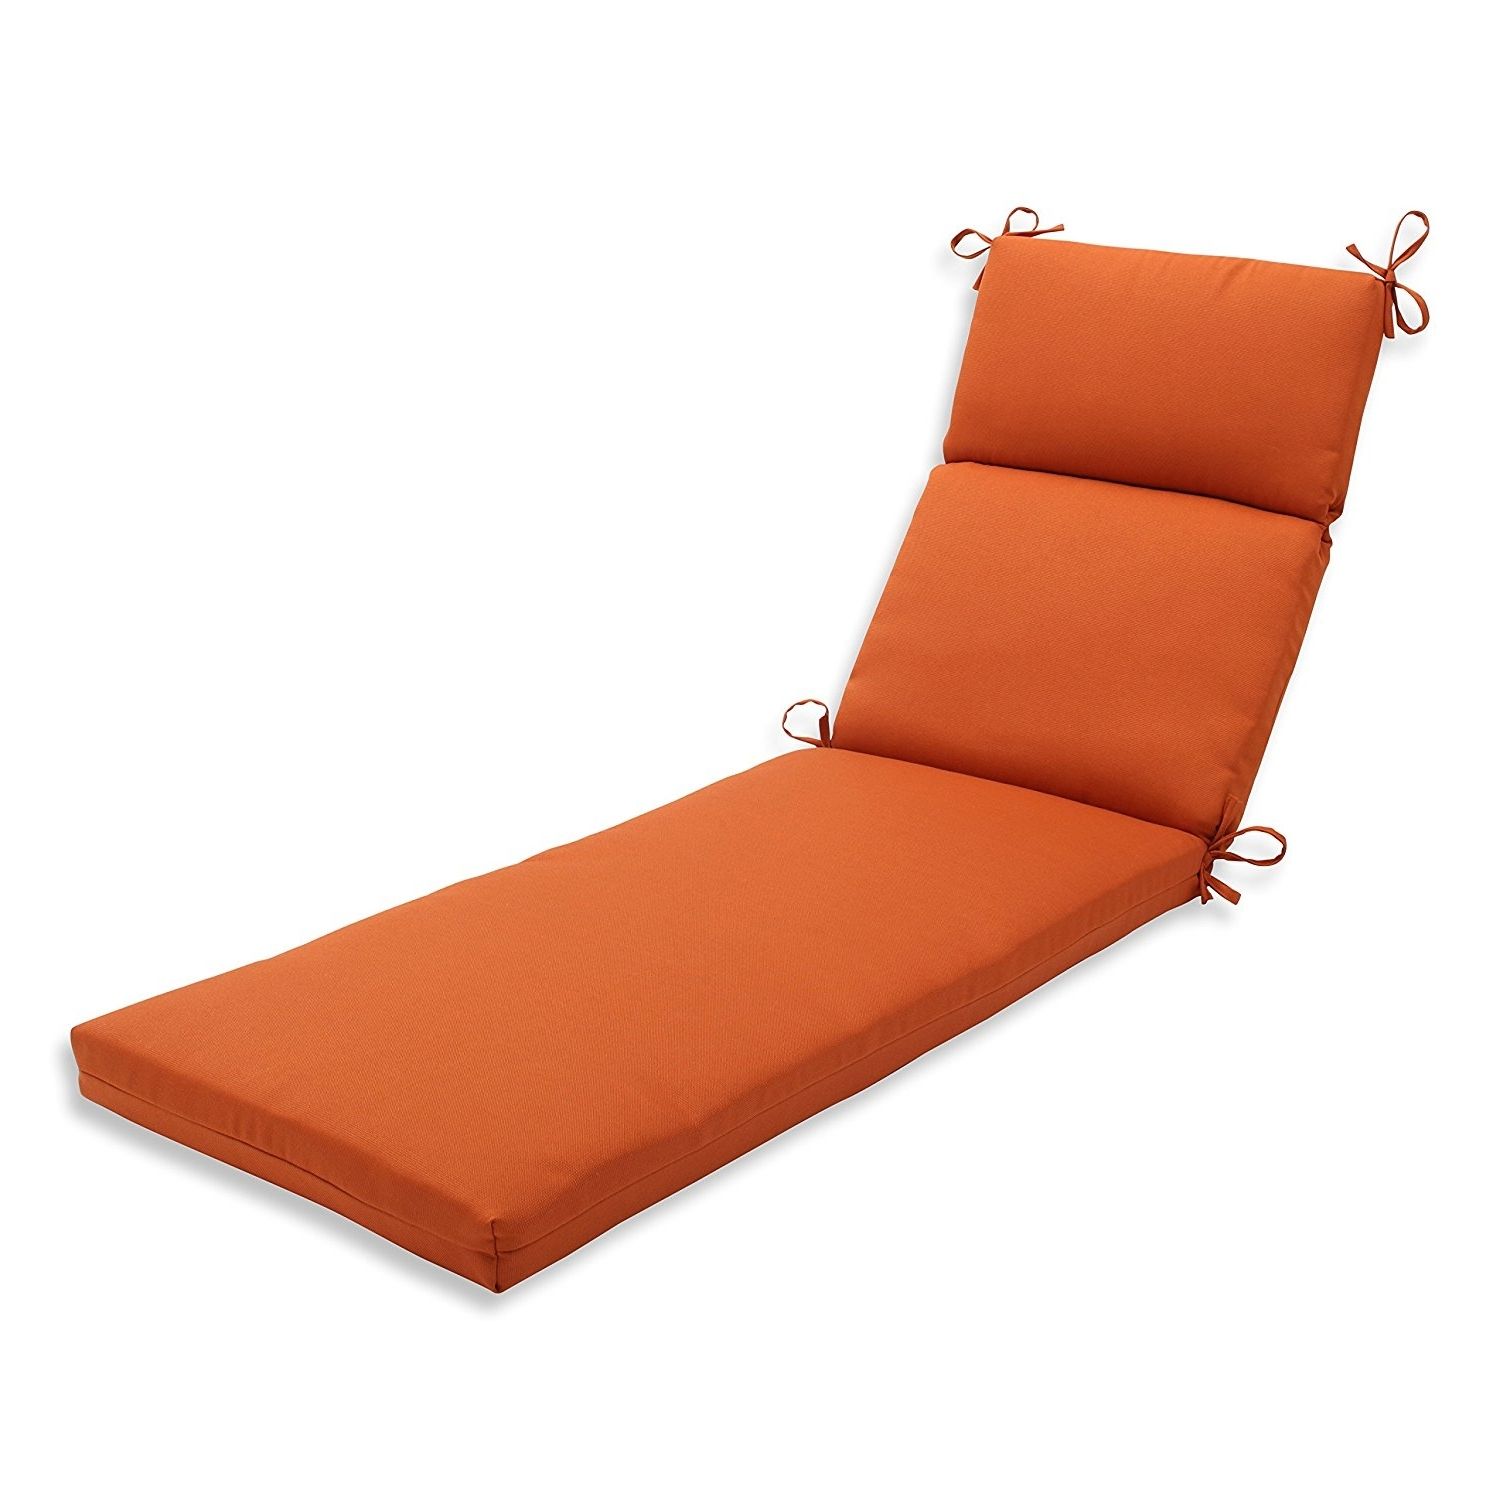 Target Chaise Lounges For 2018 Outdoor : Target Chaise Lounge Home Depot Patio Cushions Thick (View 13 of 15)